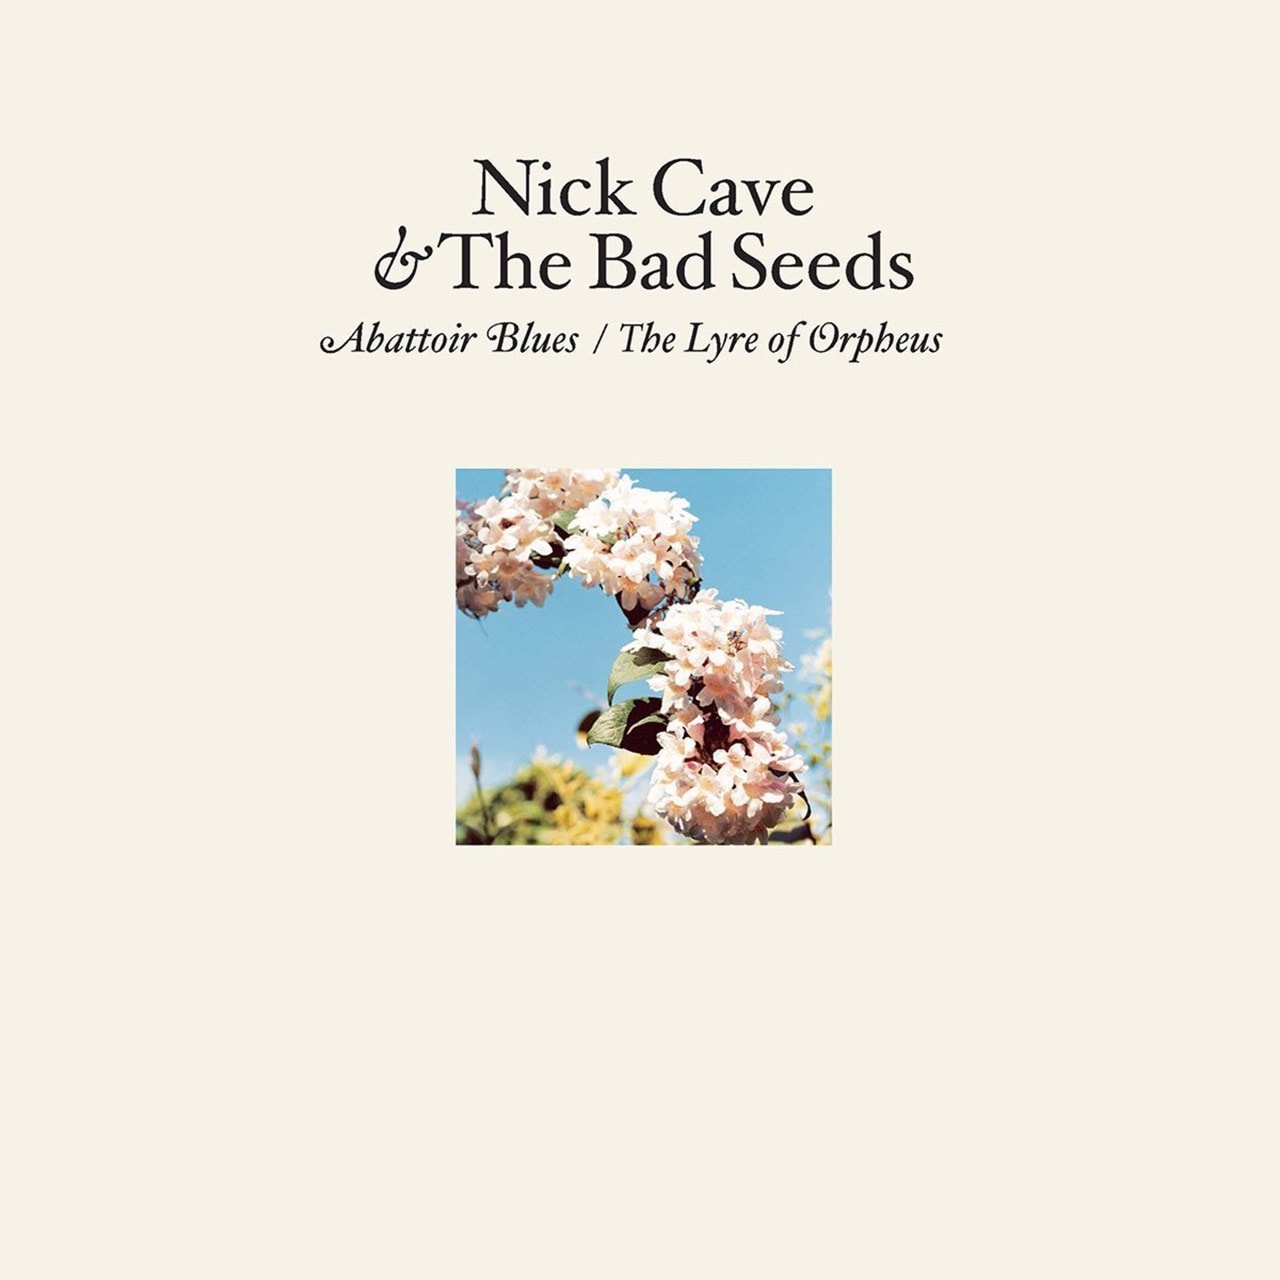 Nick Cave & The Bad Seeds - Abbatoir Blues / The Lyre Of Orpheus